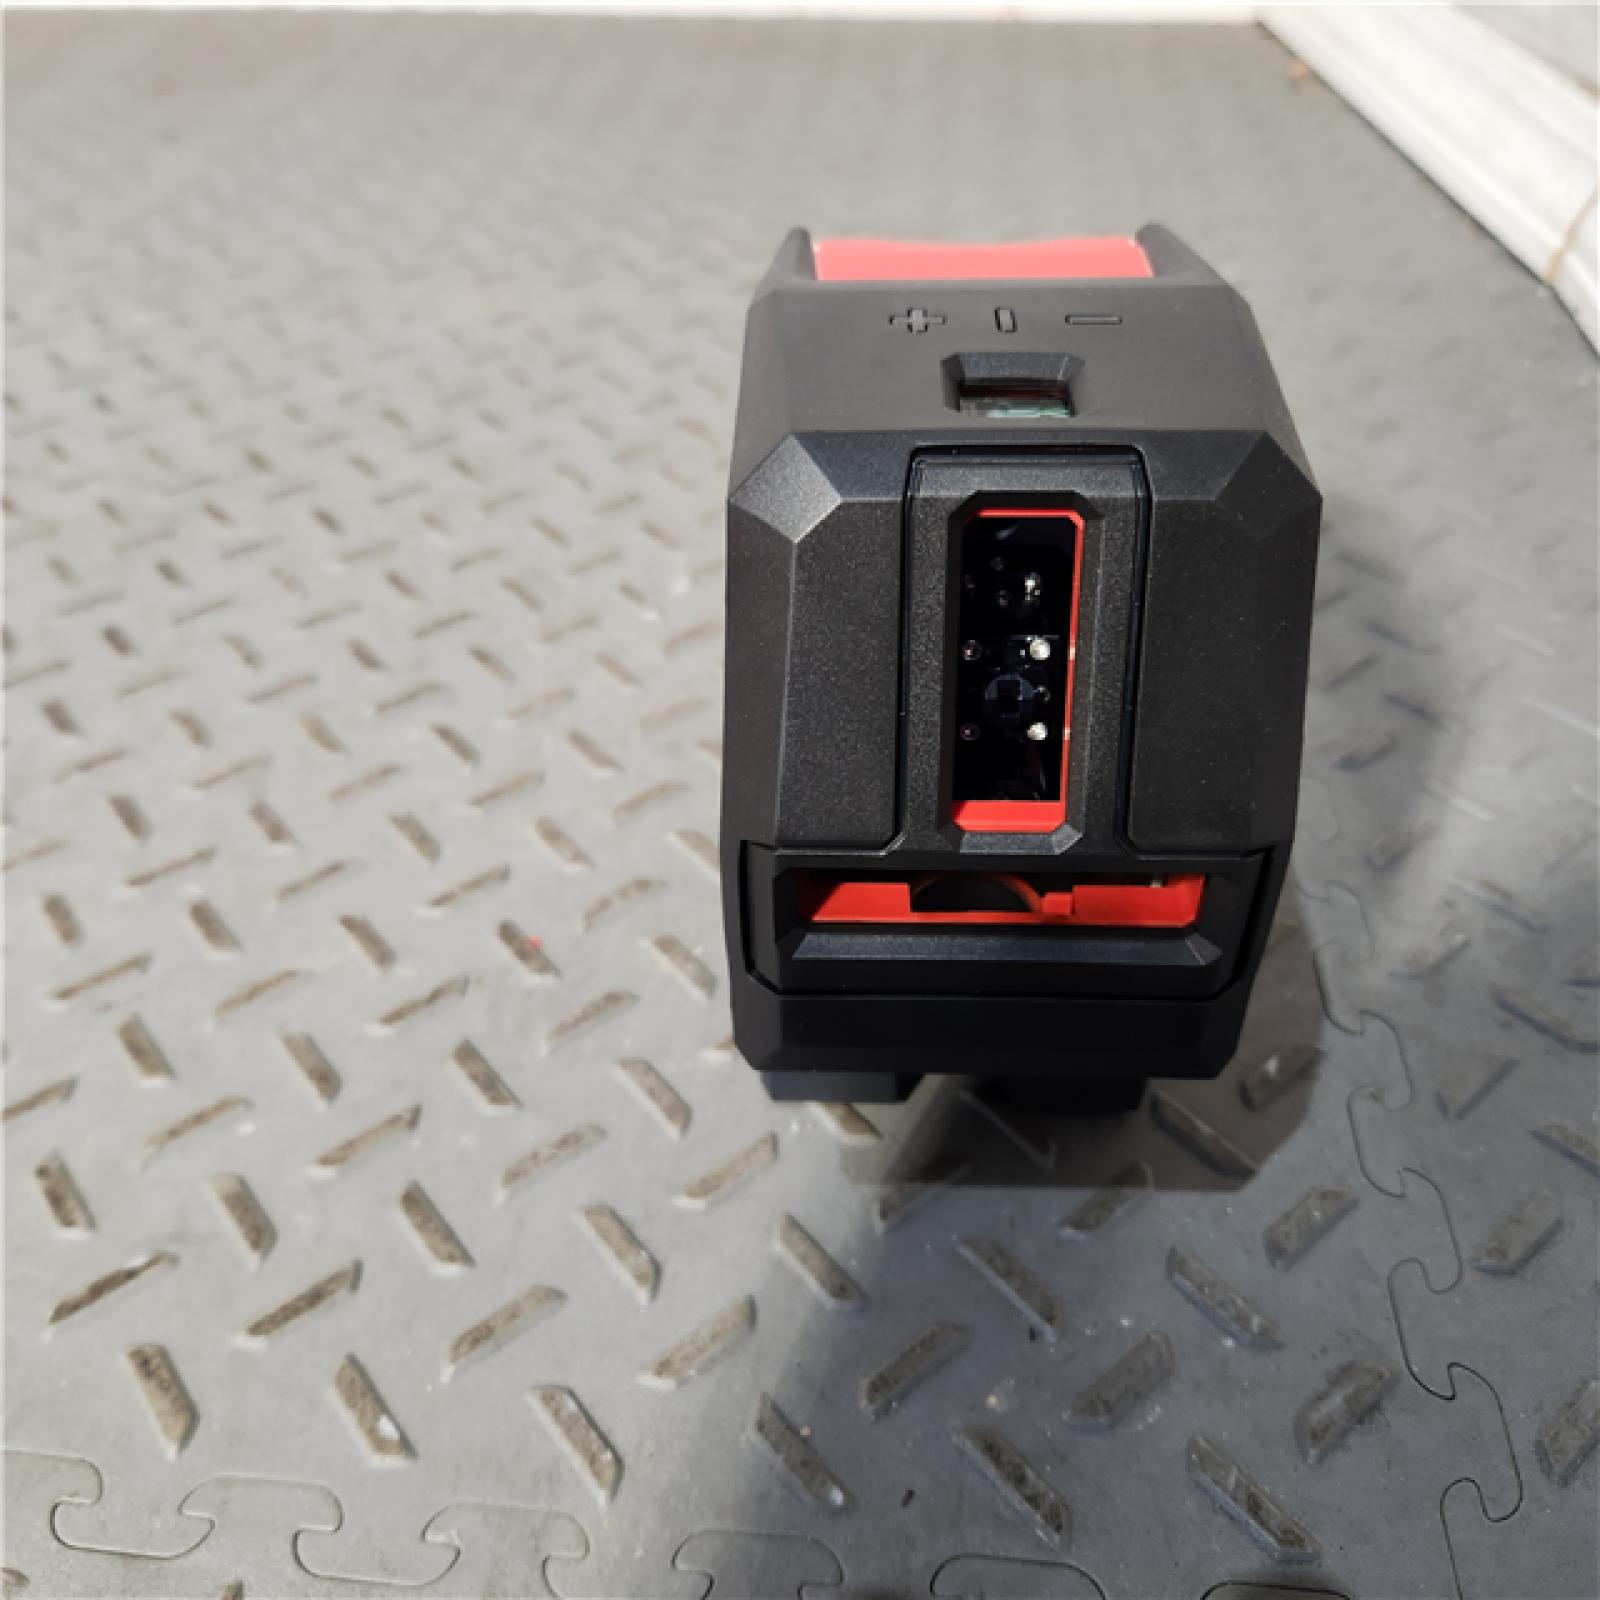 HOUSTON Location-AS-IS-Milwaukee 3622-20 M12 12V Lithium-Ion Cordless Green Beam Cross Line & Plumb Points Laser (Tool Only) APPEARS IN NEW! Condition